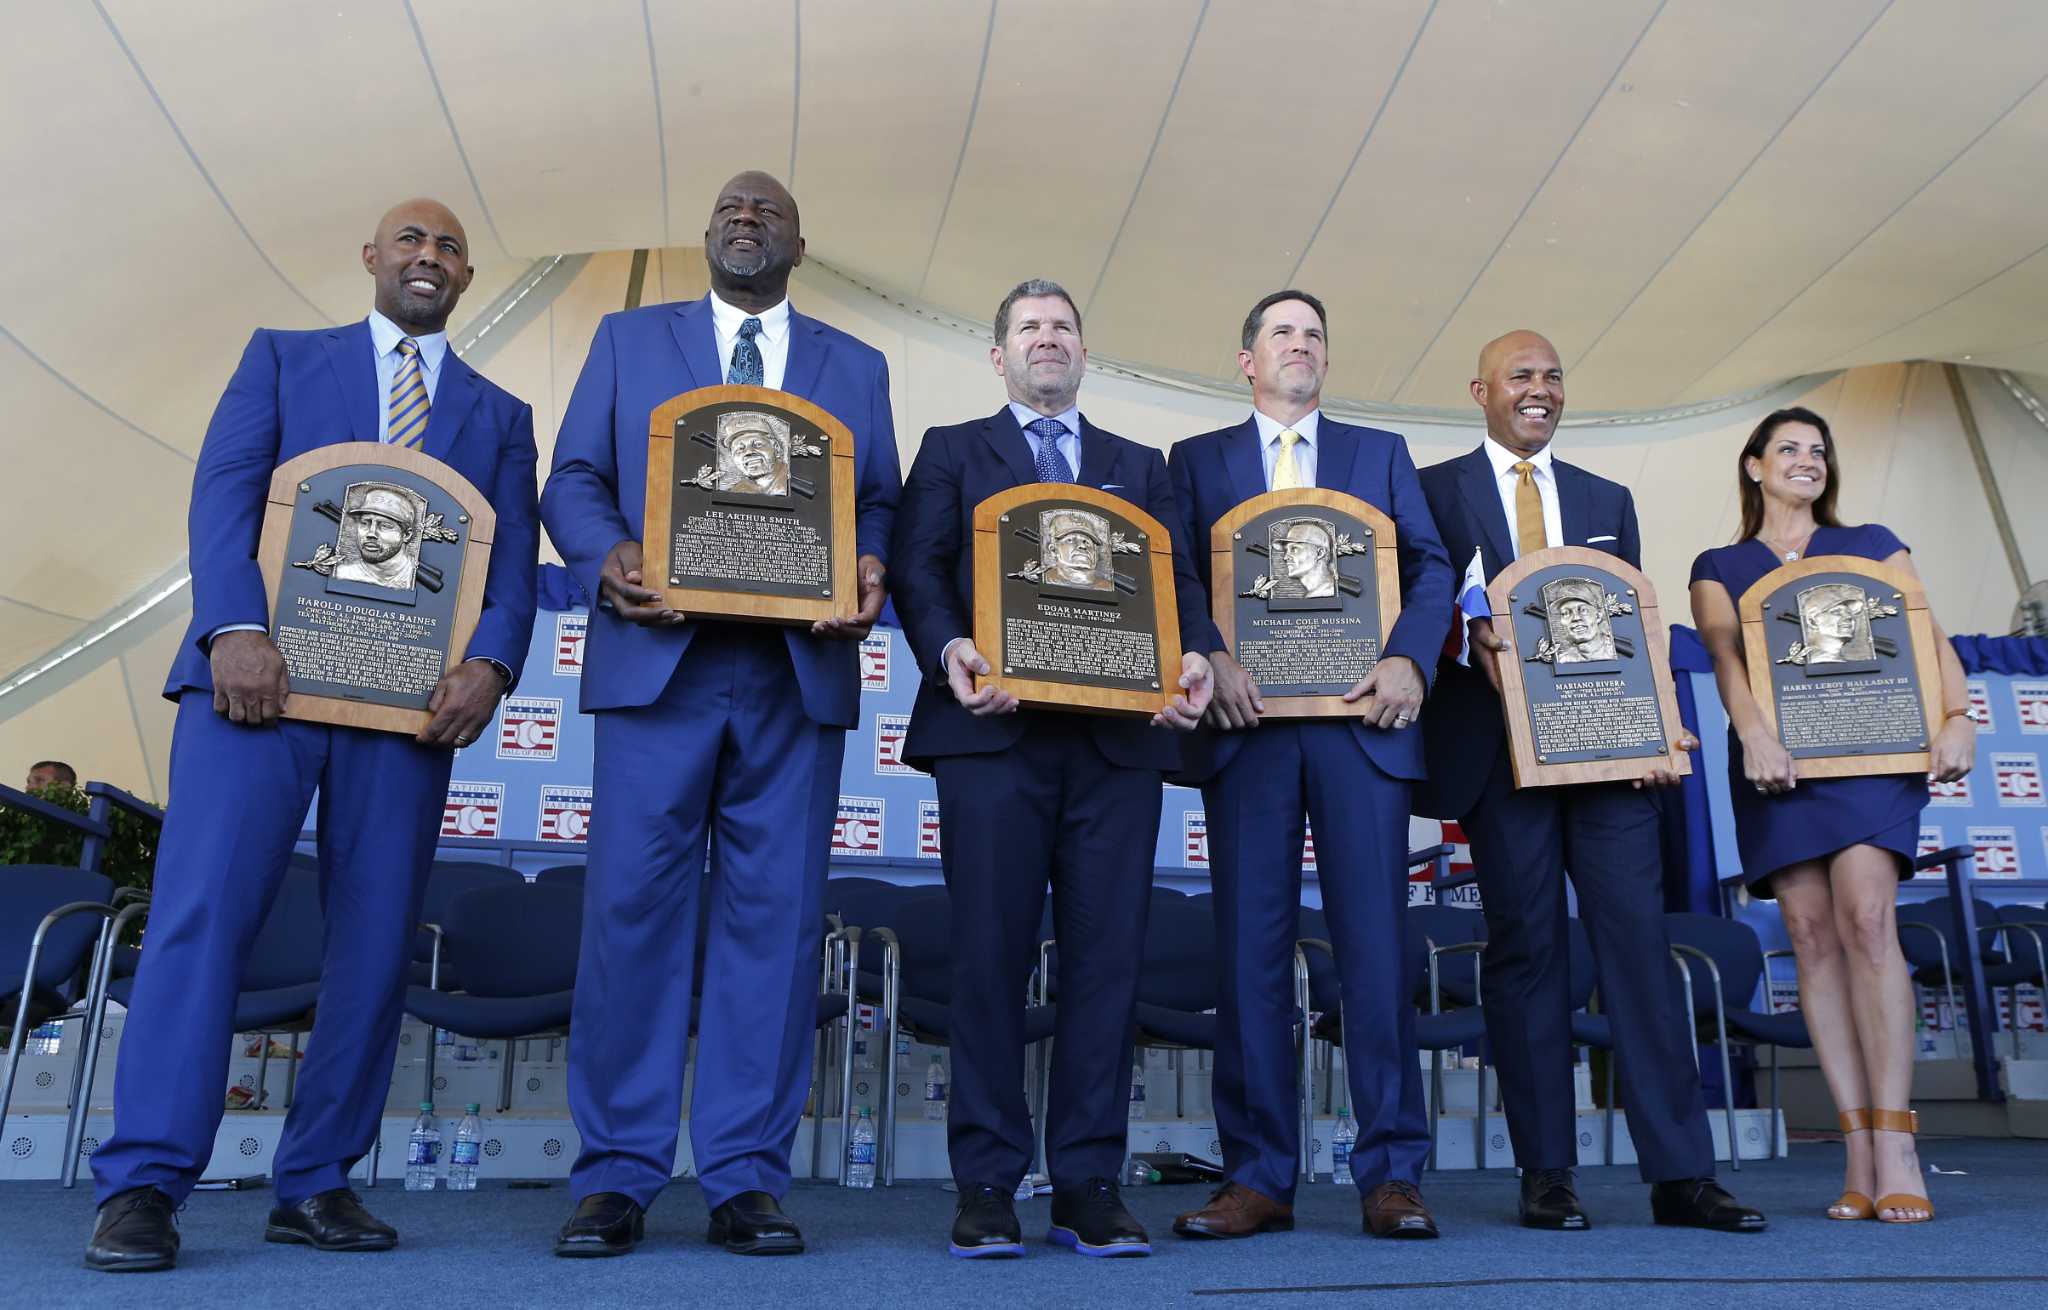 Mariano Rivera unanimously elected to Hall of Fame, along with Roy